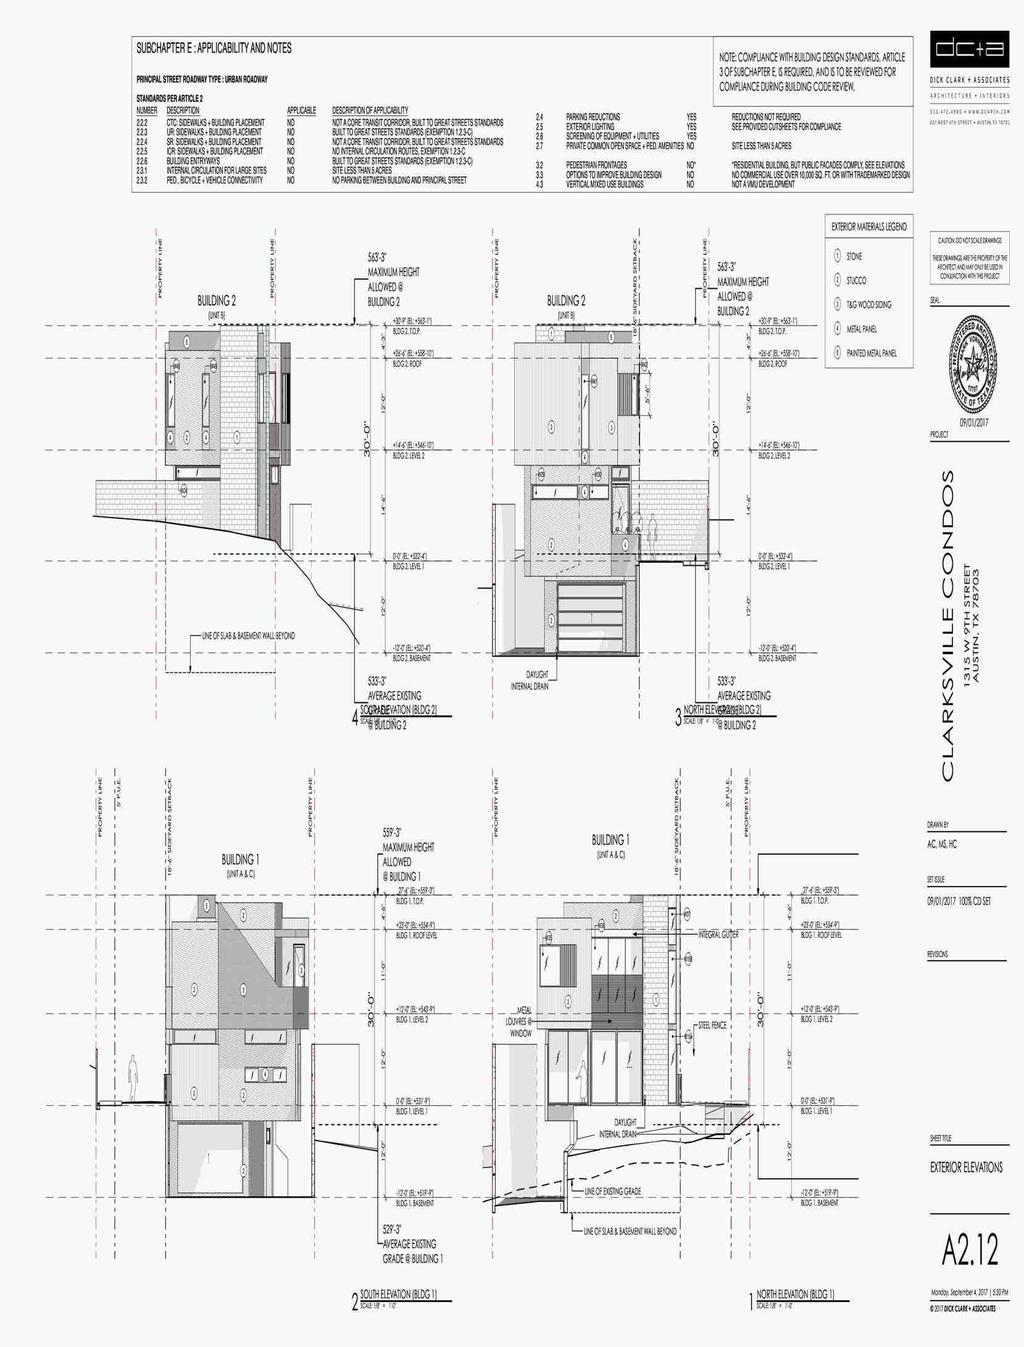 Plans and Elevations - Page 6 Form SCNLGL - "TOTAL"